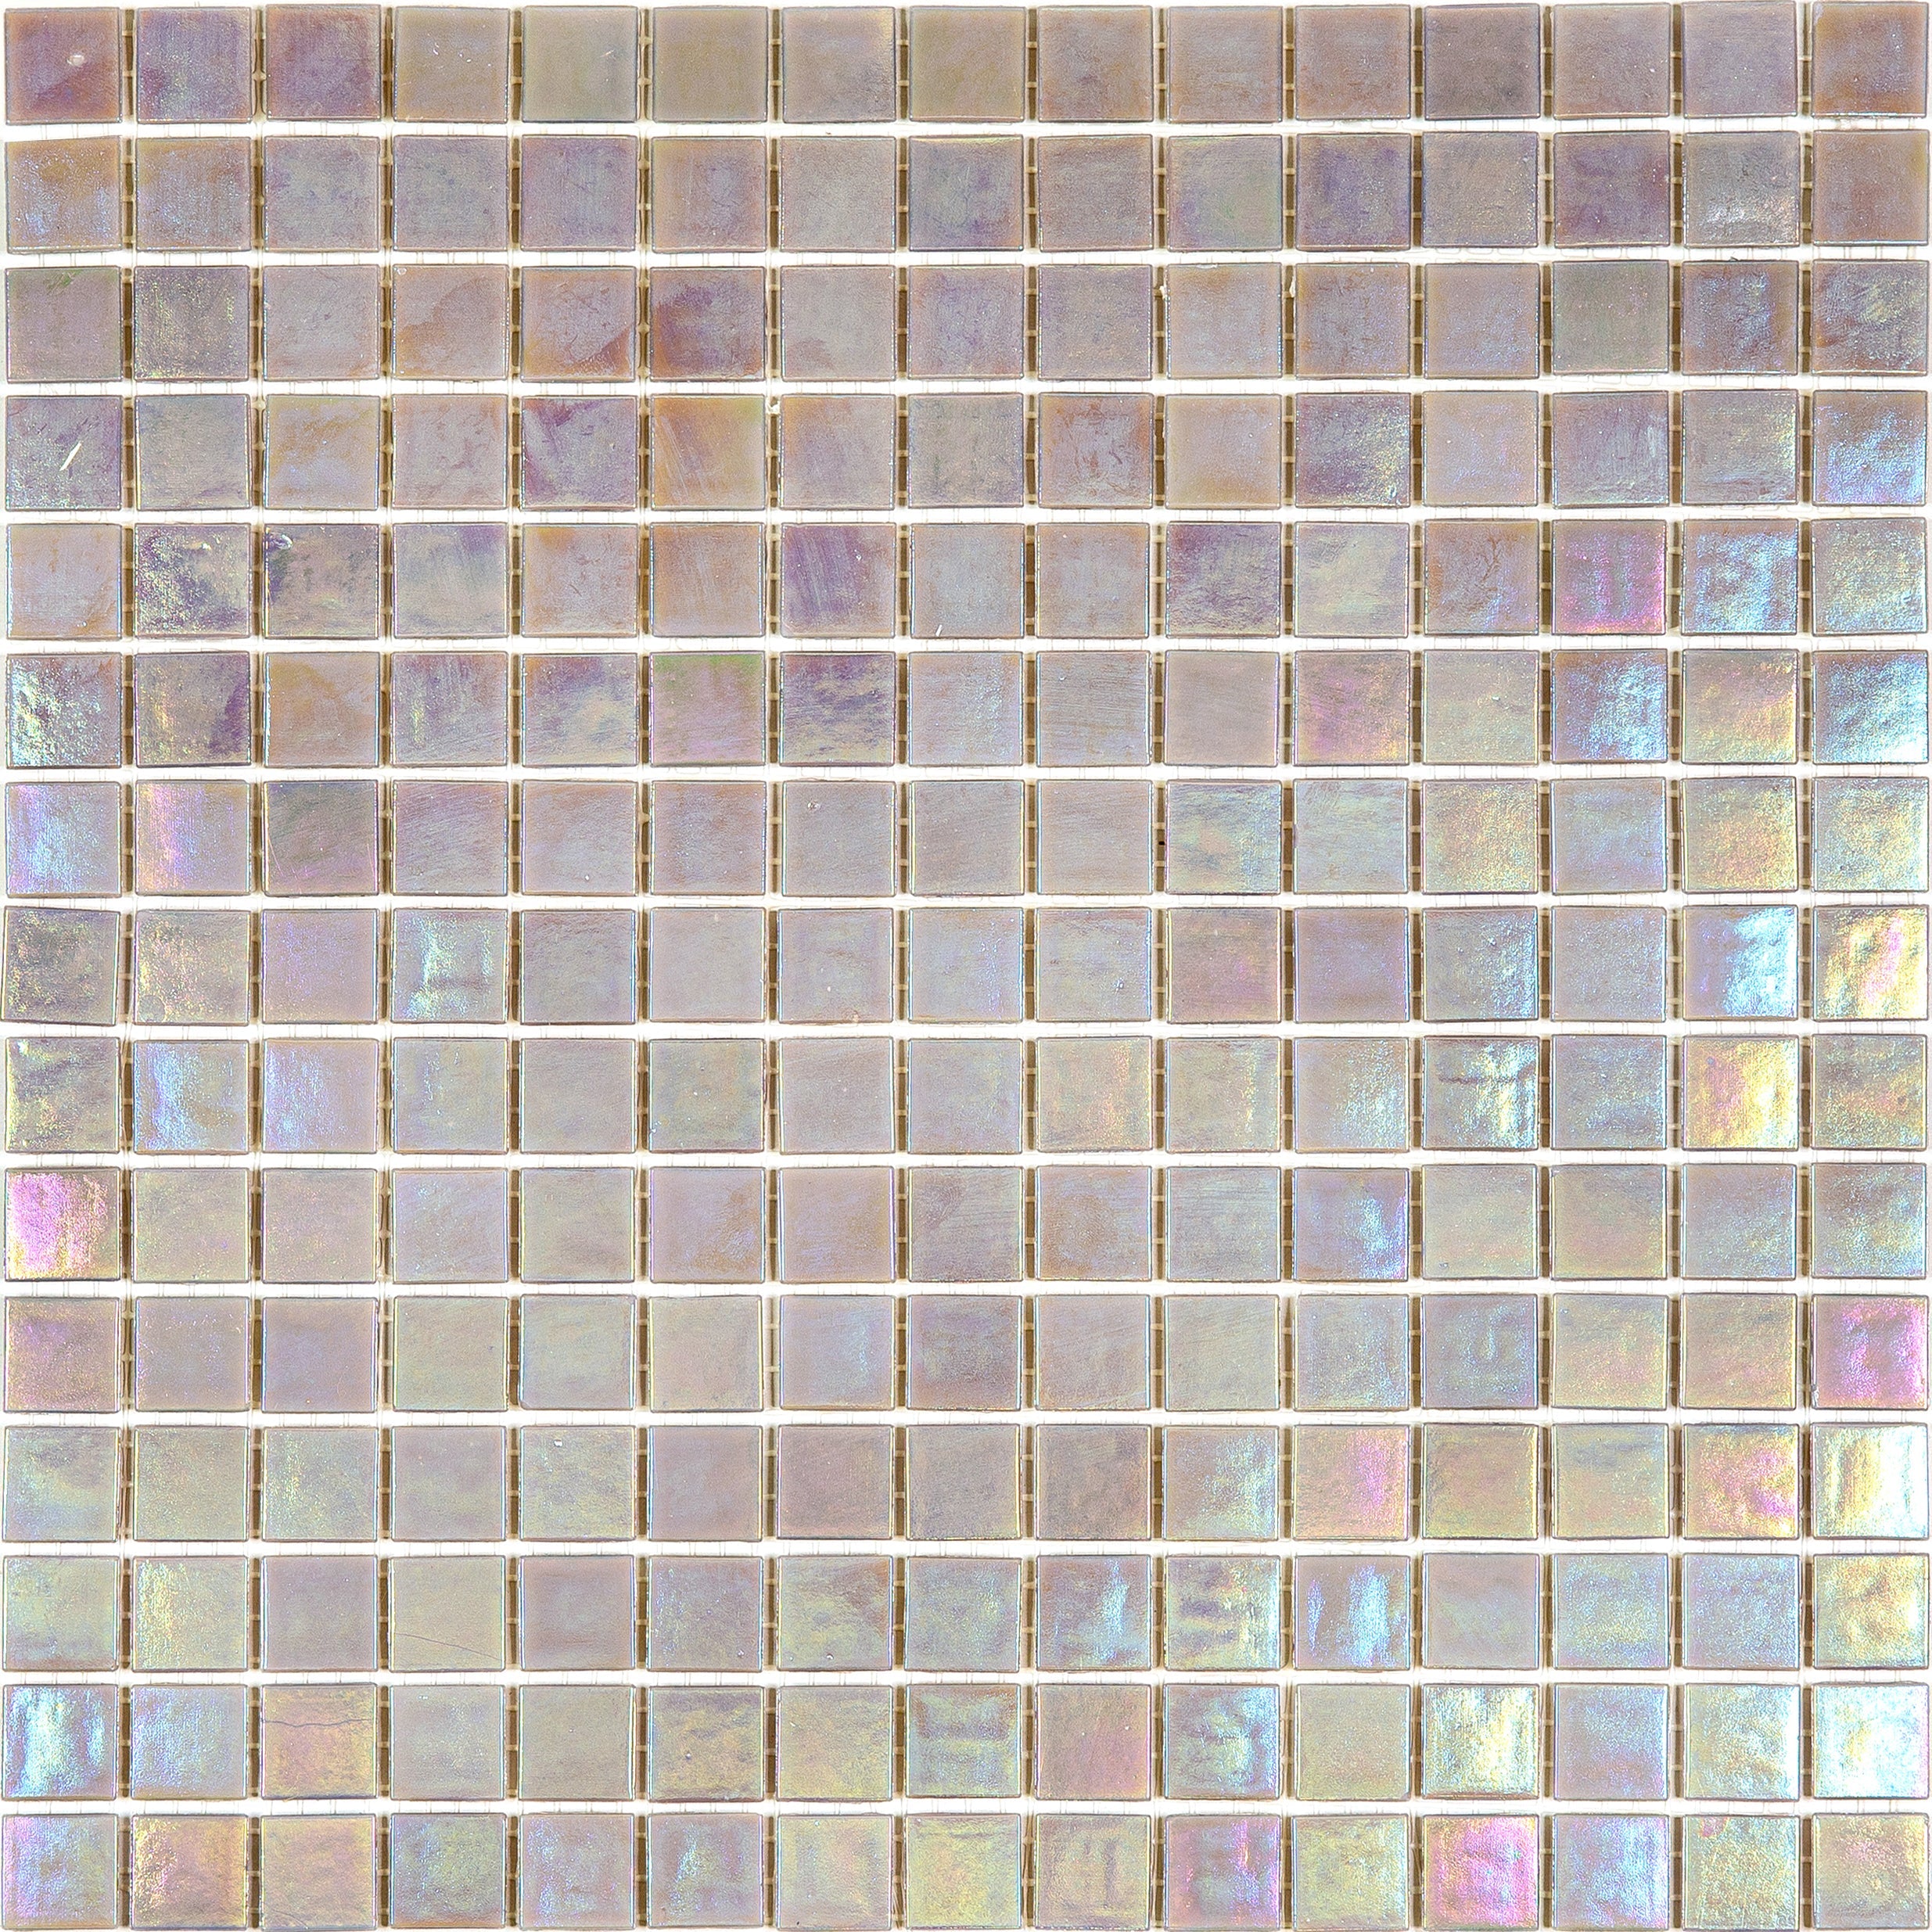 mir alma solid colors 0_8 inch pearly pe49 wall and floor mosaic distributed by surface group natural materials